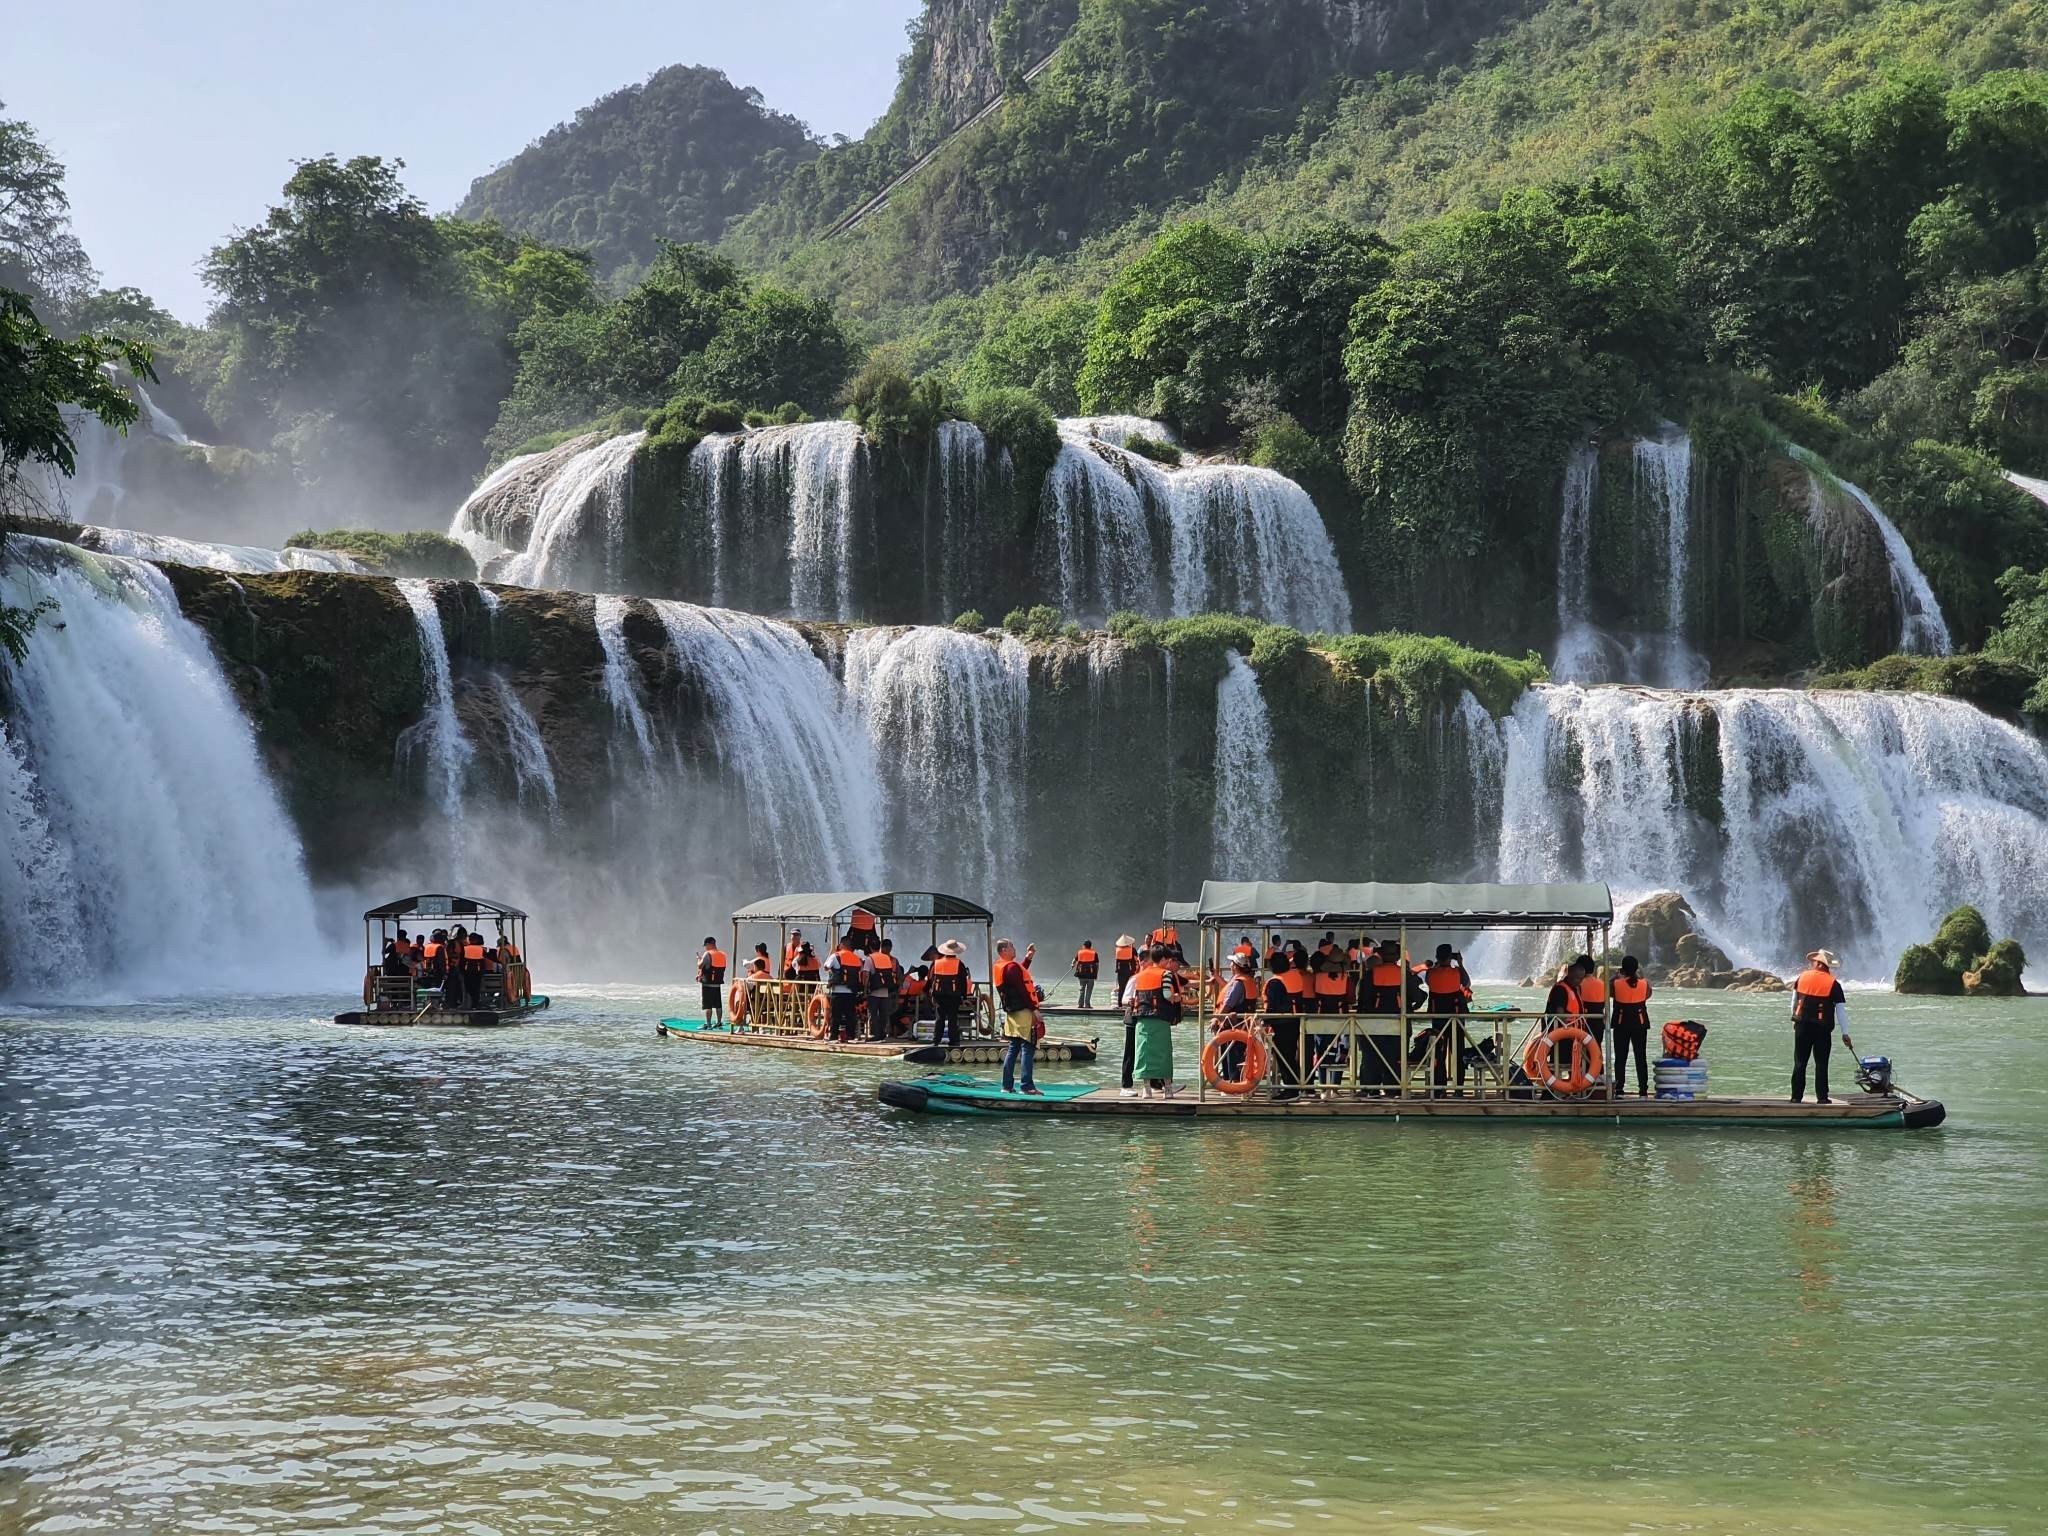 BAN GIOC WATERFALL 3D2N FROM HANOI DEPARTURE FRIDAY